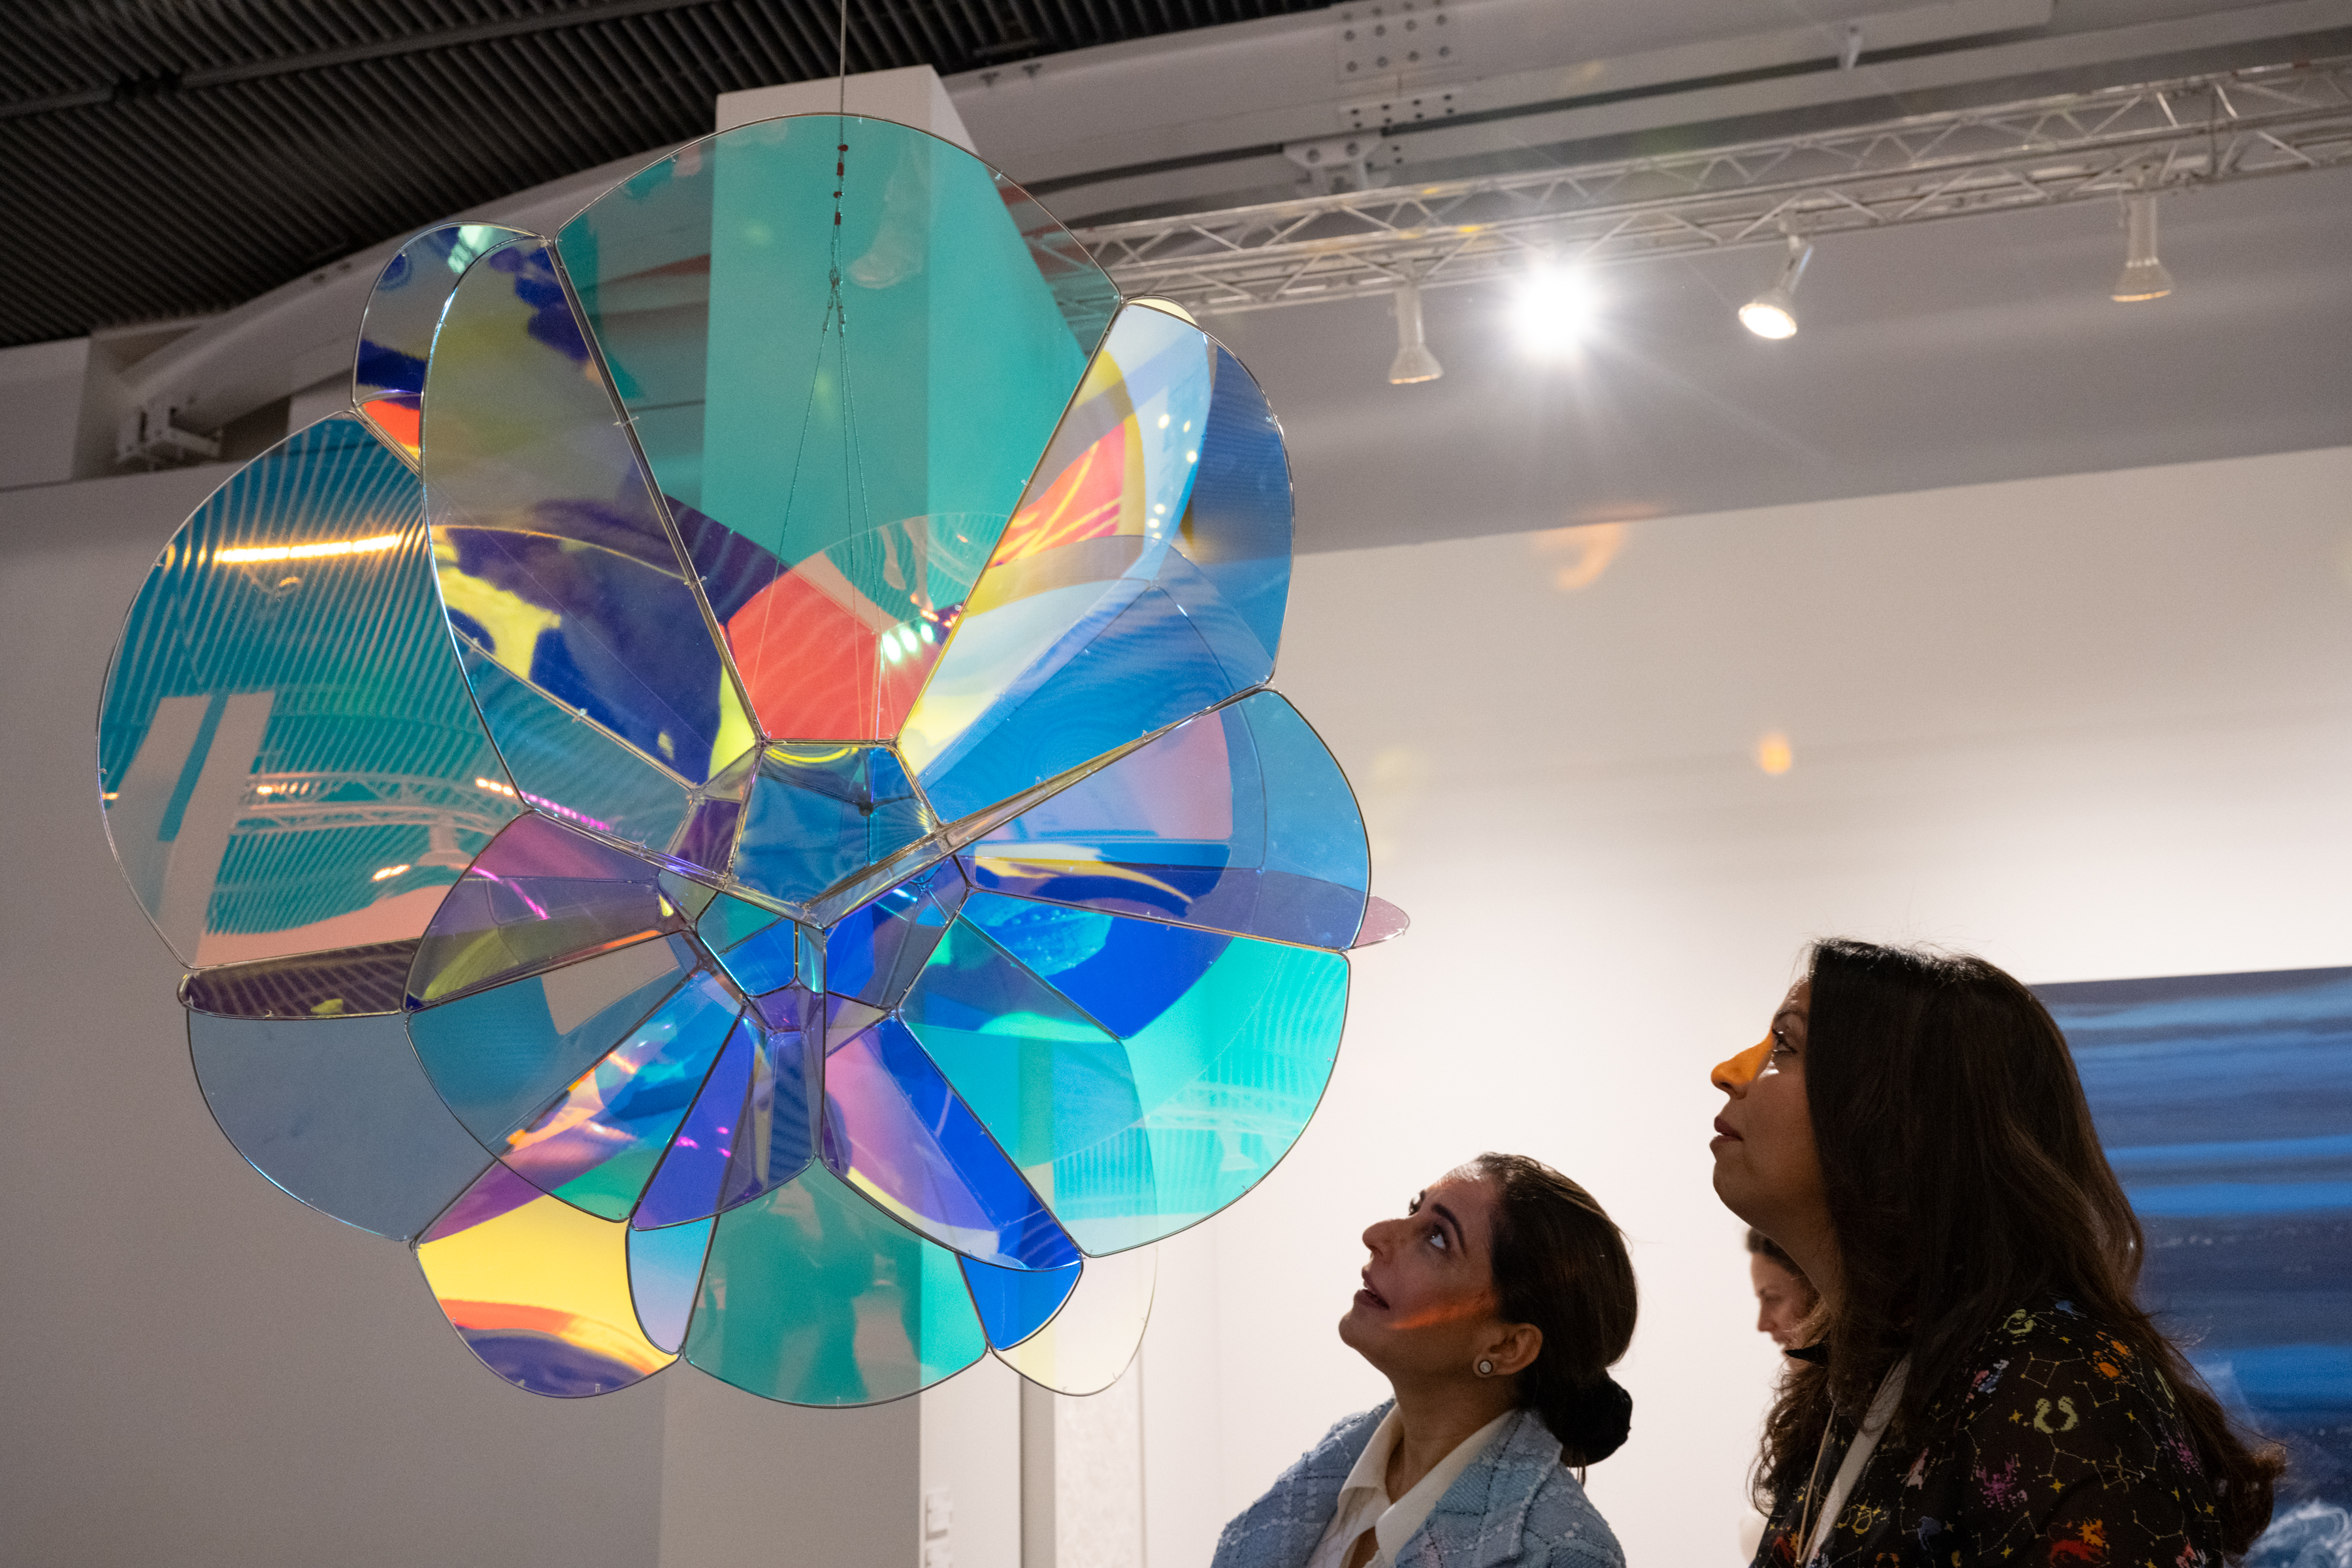 Art fair goers look at a colorful hanging sculpture of shimmering multicolor plexiglass 